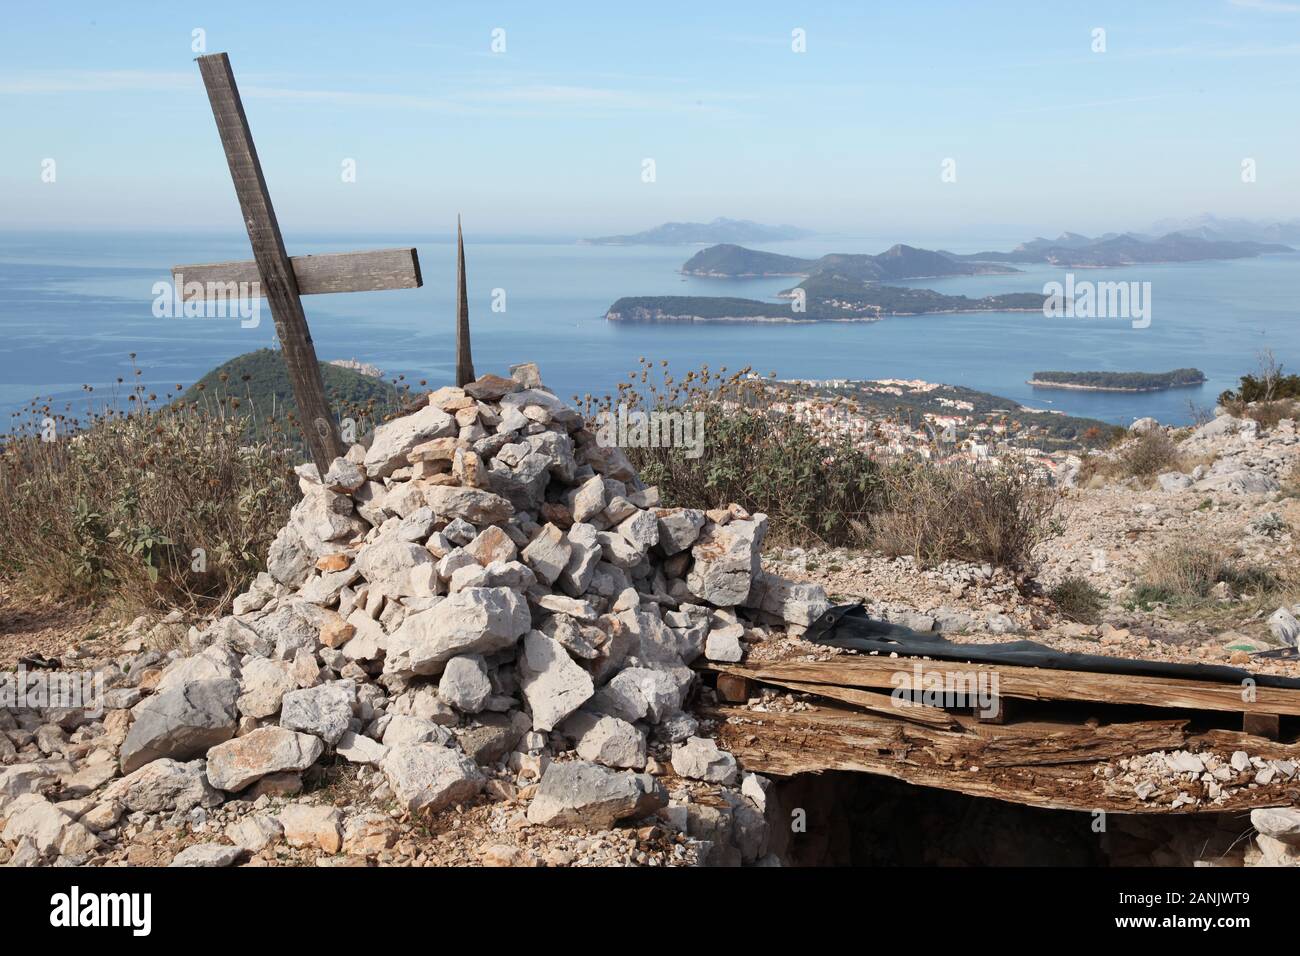 Coastal view of Elaphite Islands, with cross in foreground, from top of Srd Hill in Dubrovnik, Croatia Stock Photo